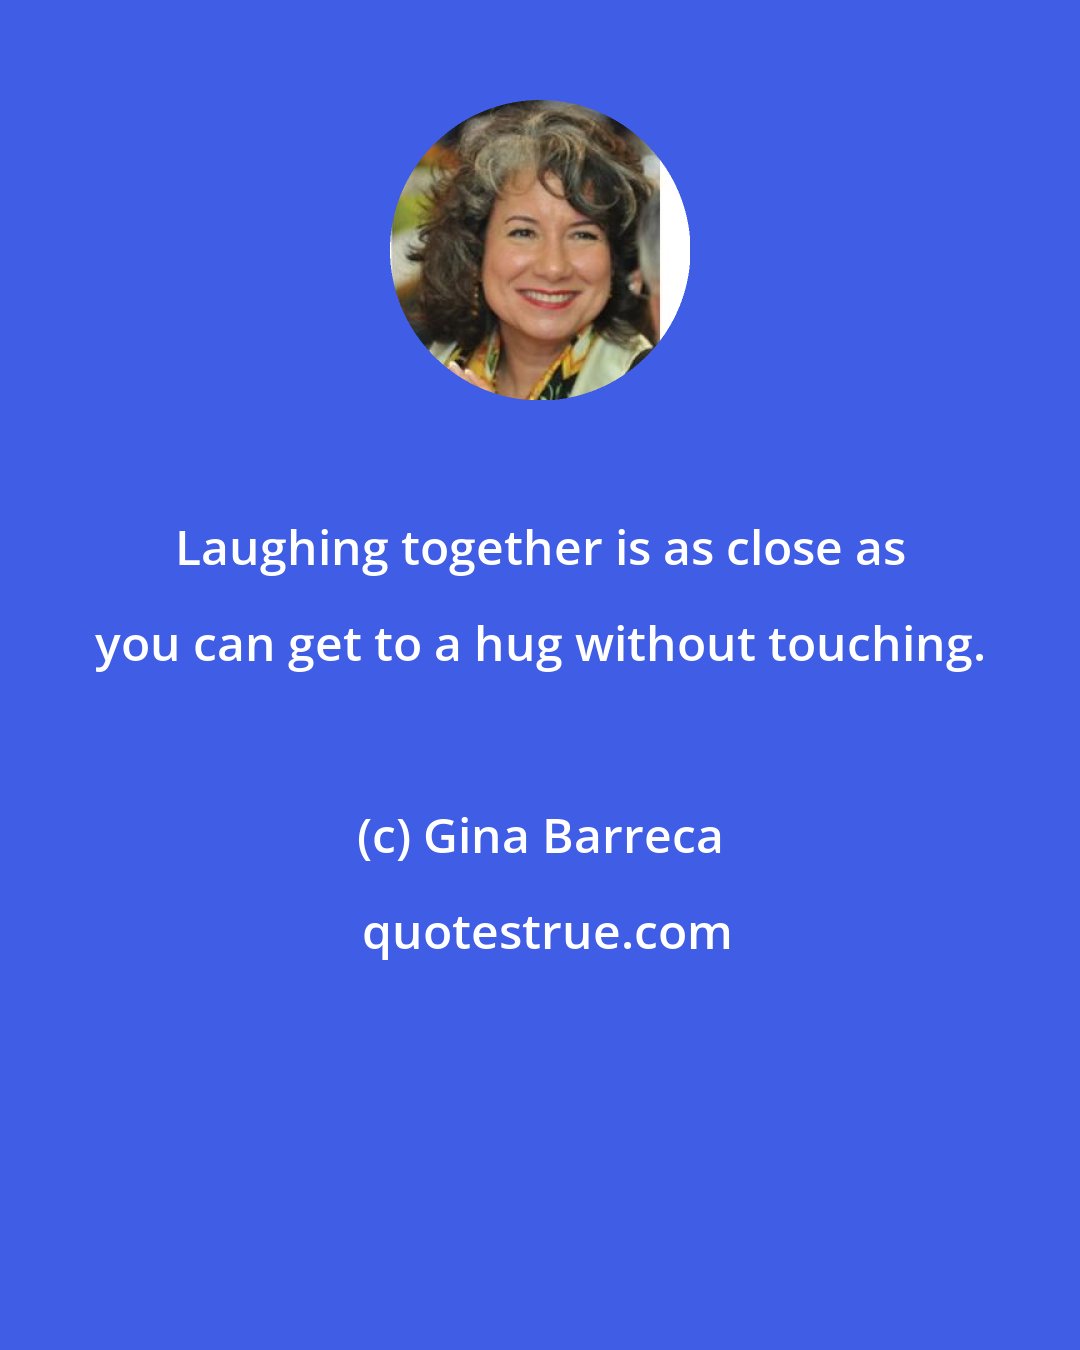 Gina Barreca: Laughing together is as close as you can get to a hug without touching.